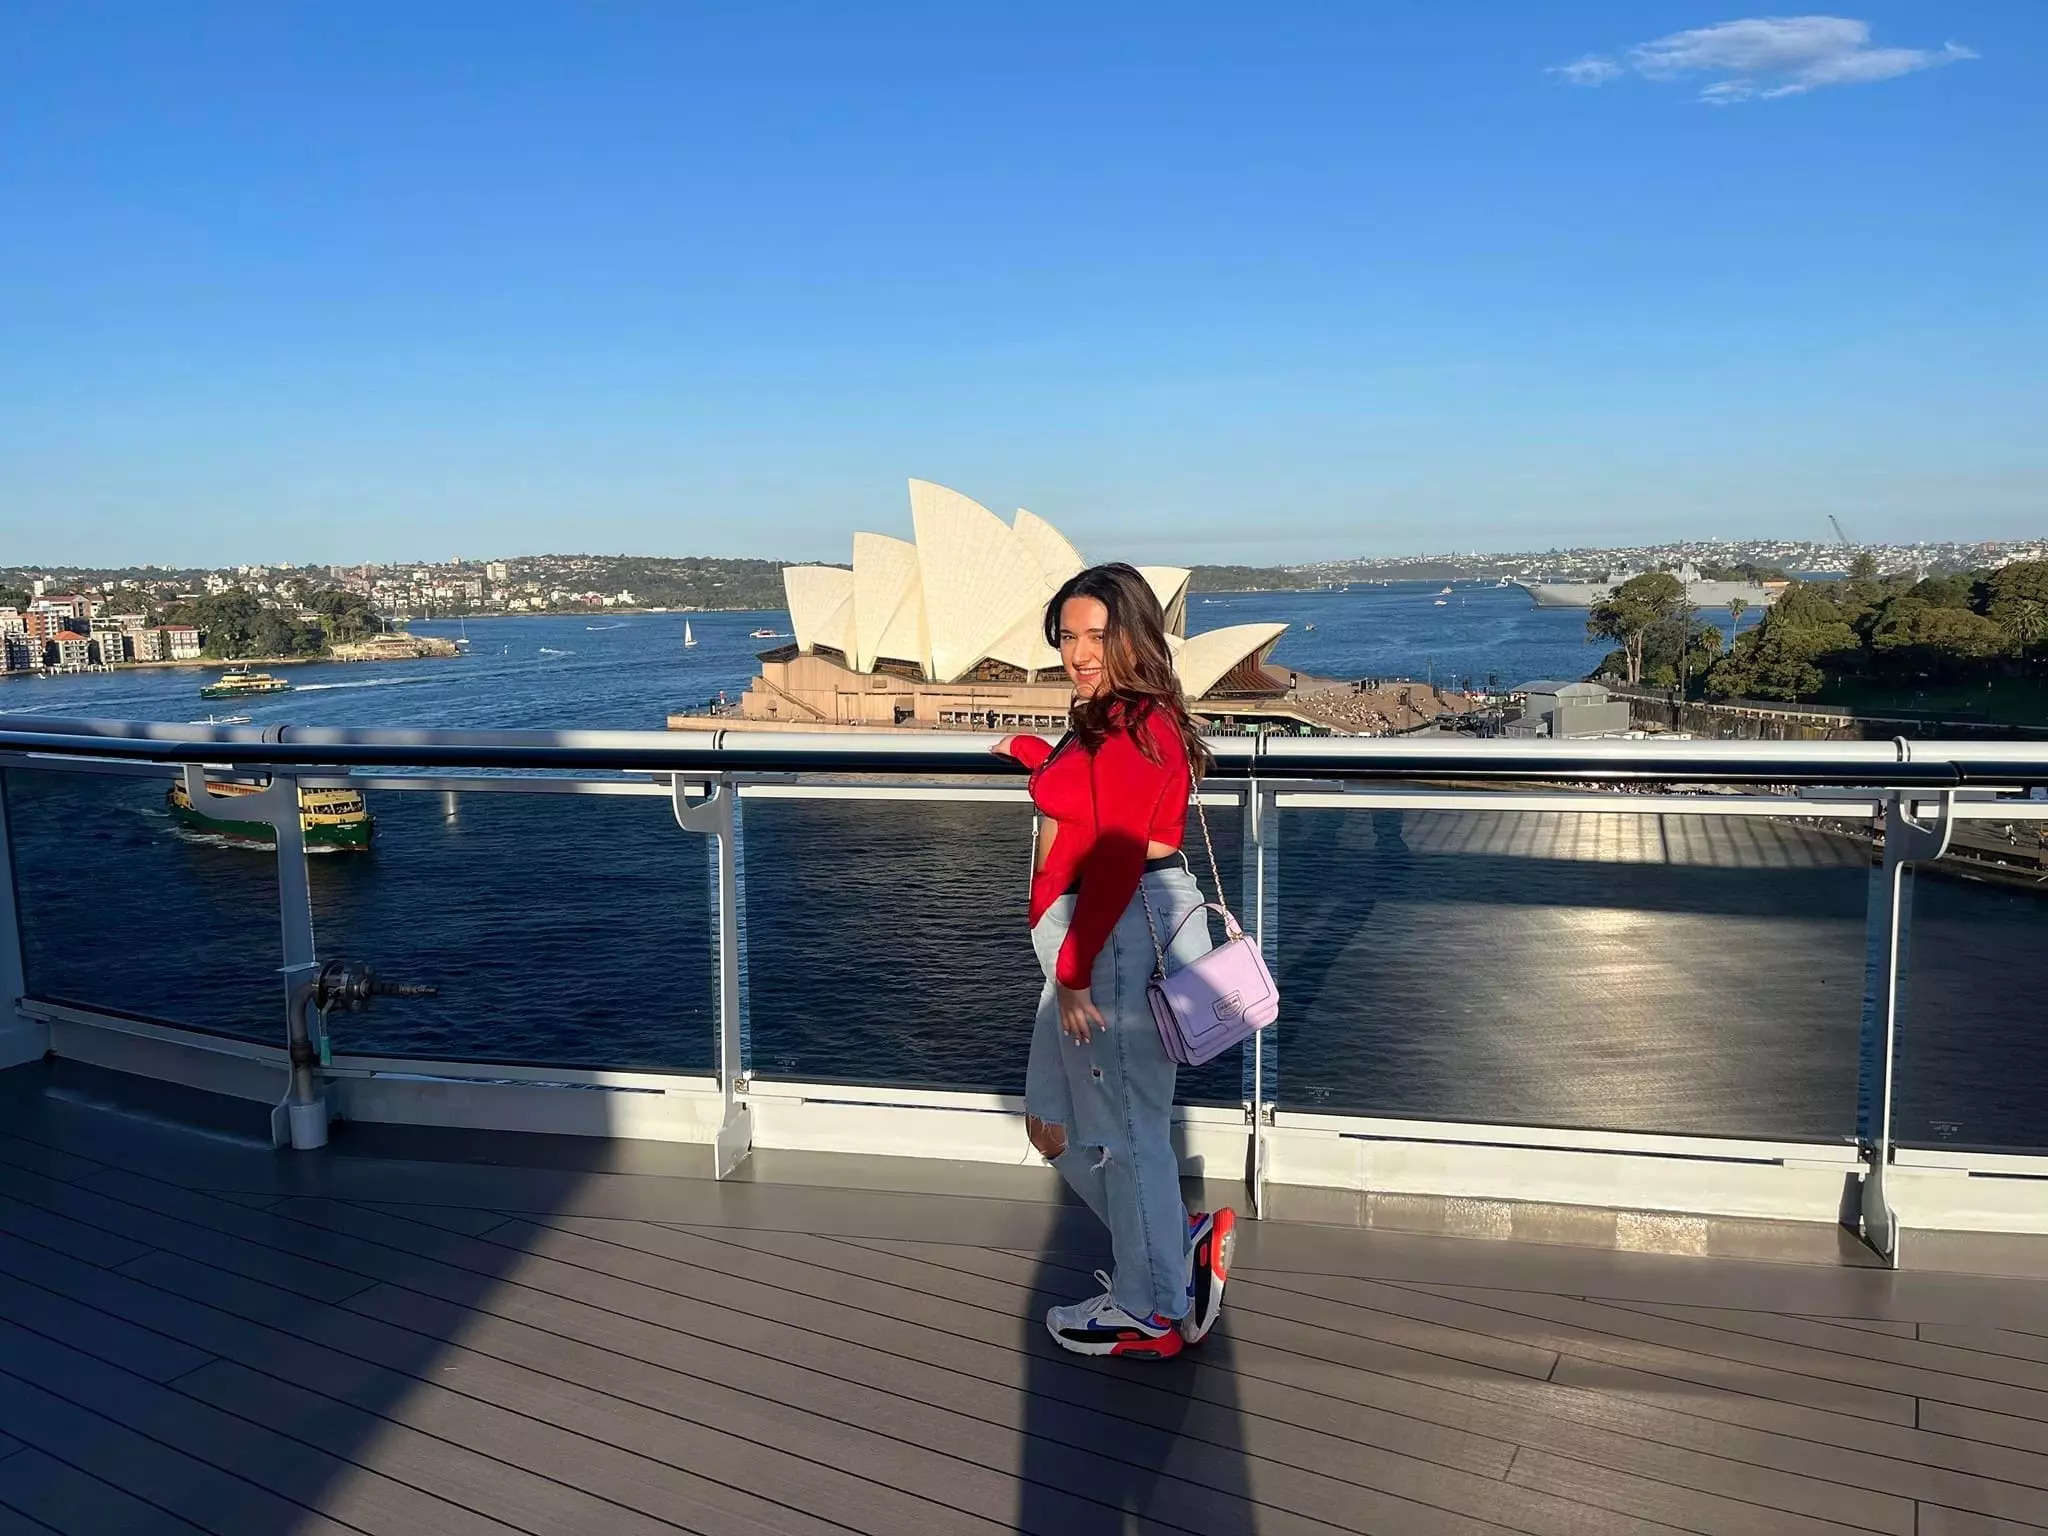 A woman stands in front of the Sydney Opera House